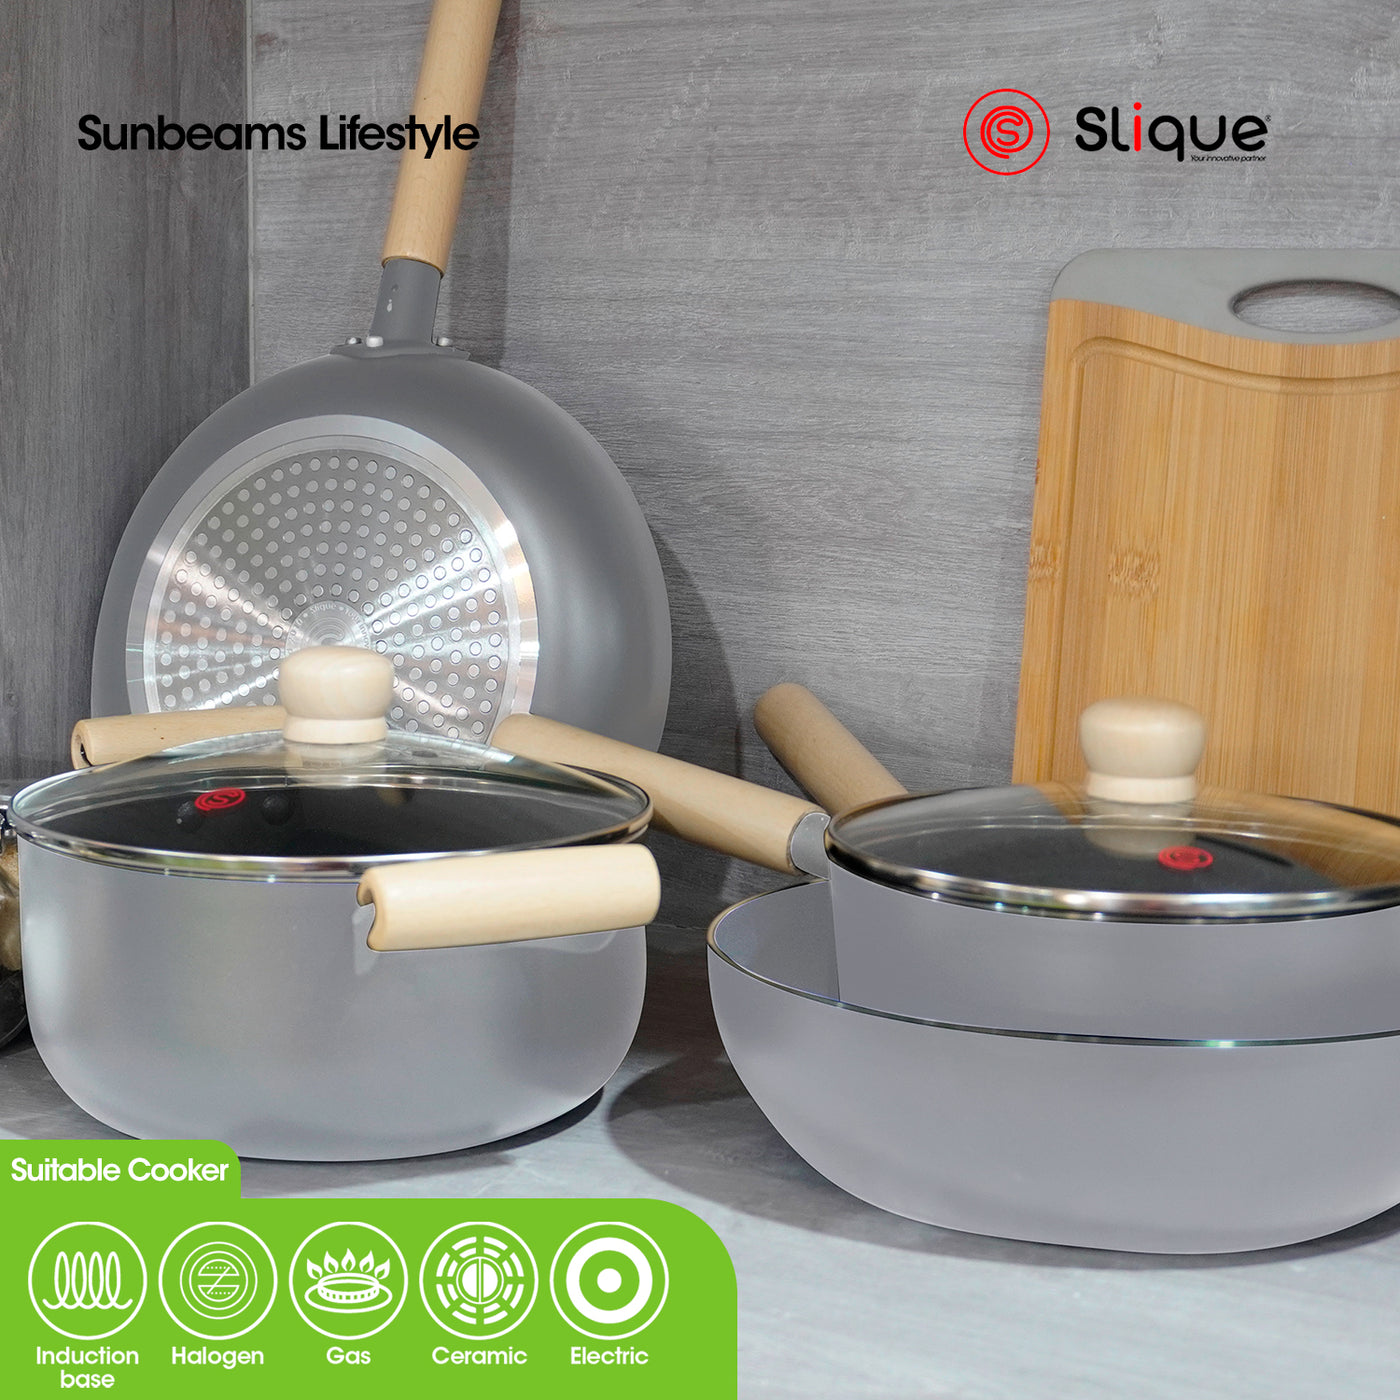 Slique Sauce Pan Stainless Steel Multi Layer Non-Stick Ceramic Coating - Grey Induction Base, Wooden Bakelite Handle Healthy Cooking Essentials Amazing Gift Idea For Any Occasion!